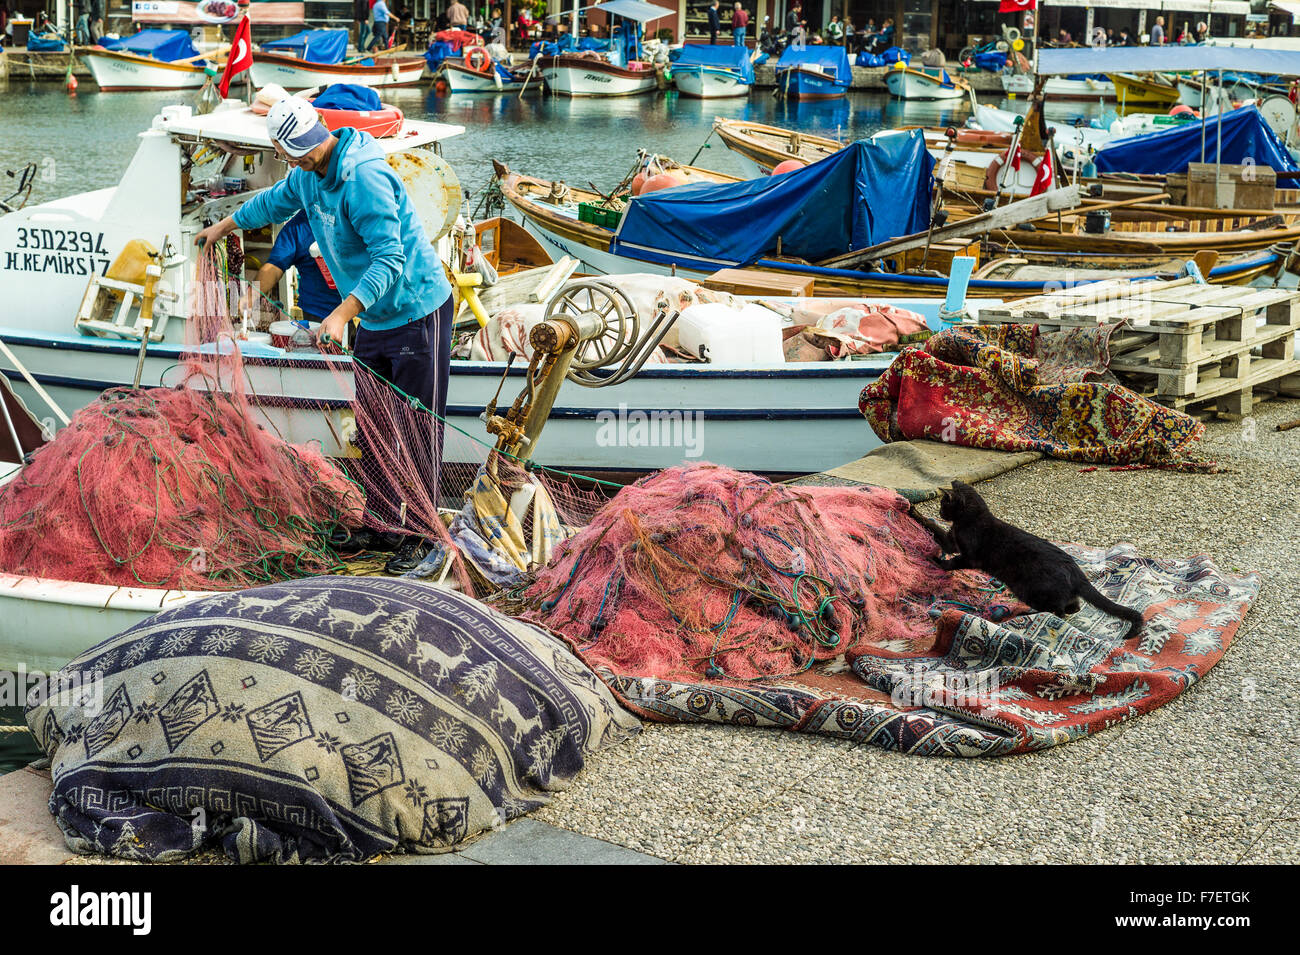 Tug or war: Fisherman pulling his nets catches the attention of the local cat! Stock Photo